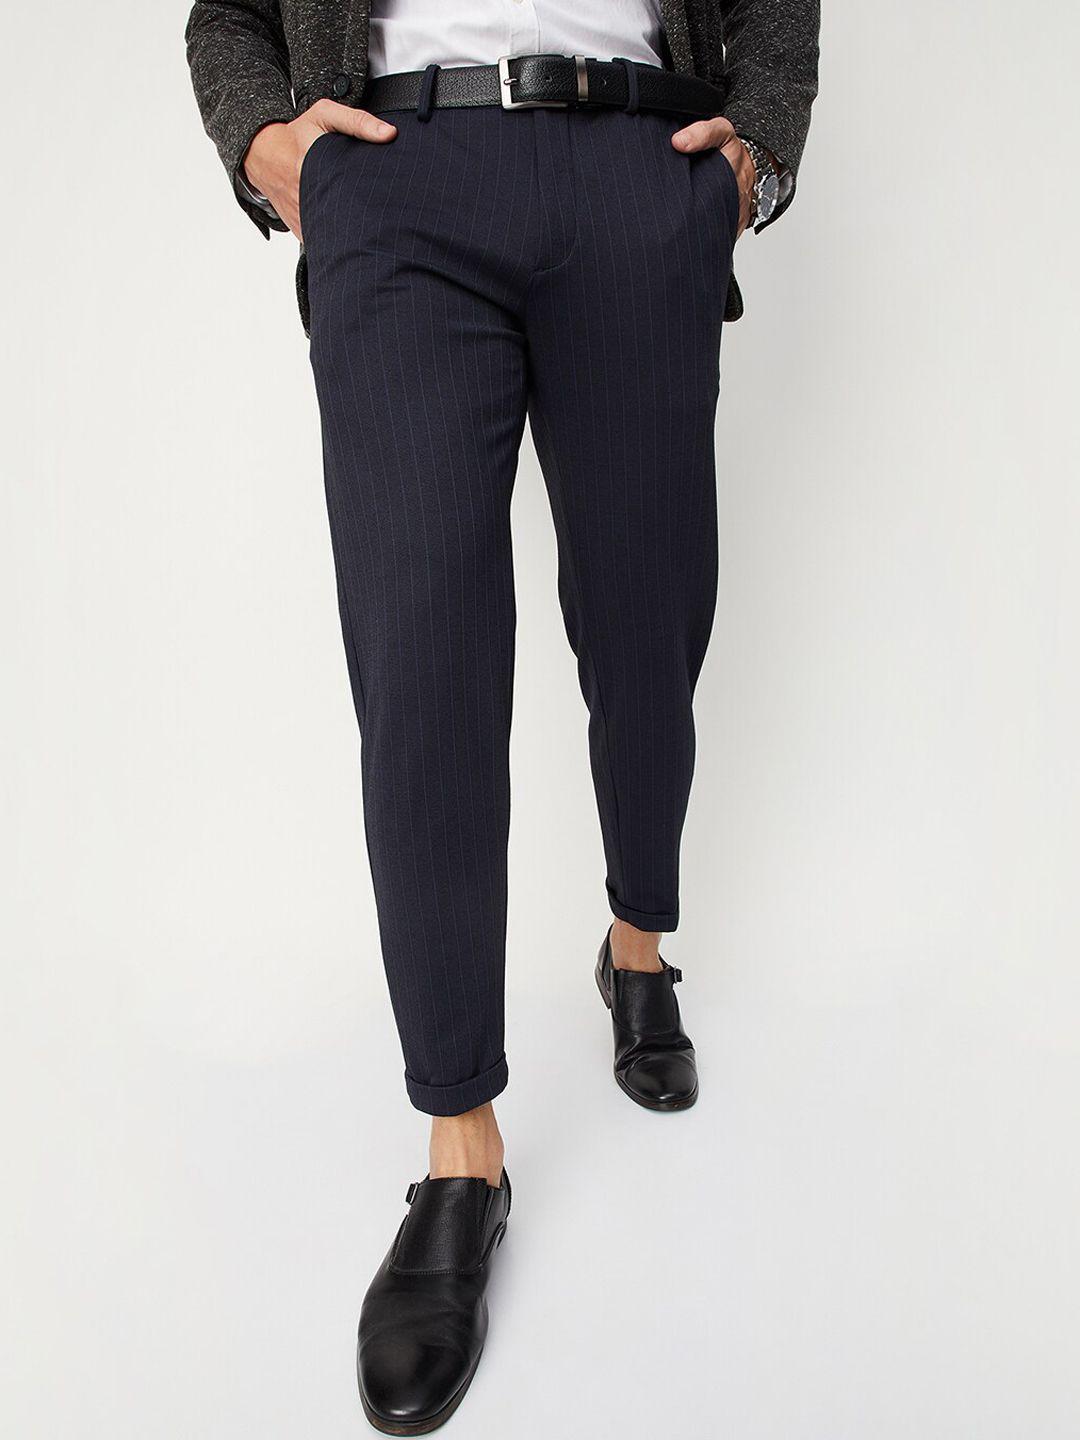 max-men-striped-cropped-relaxed-fit-formal-trousers